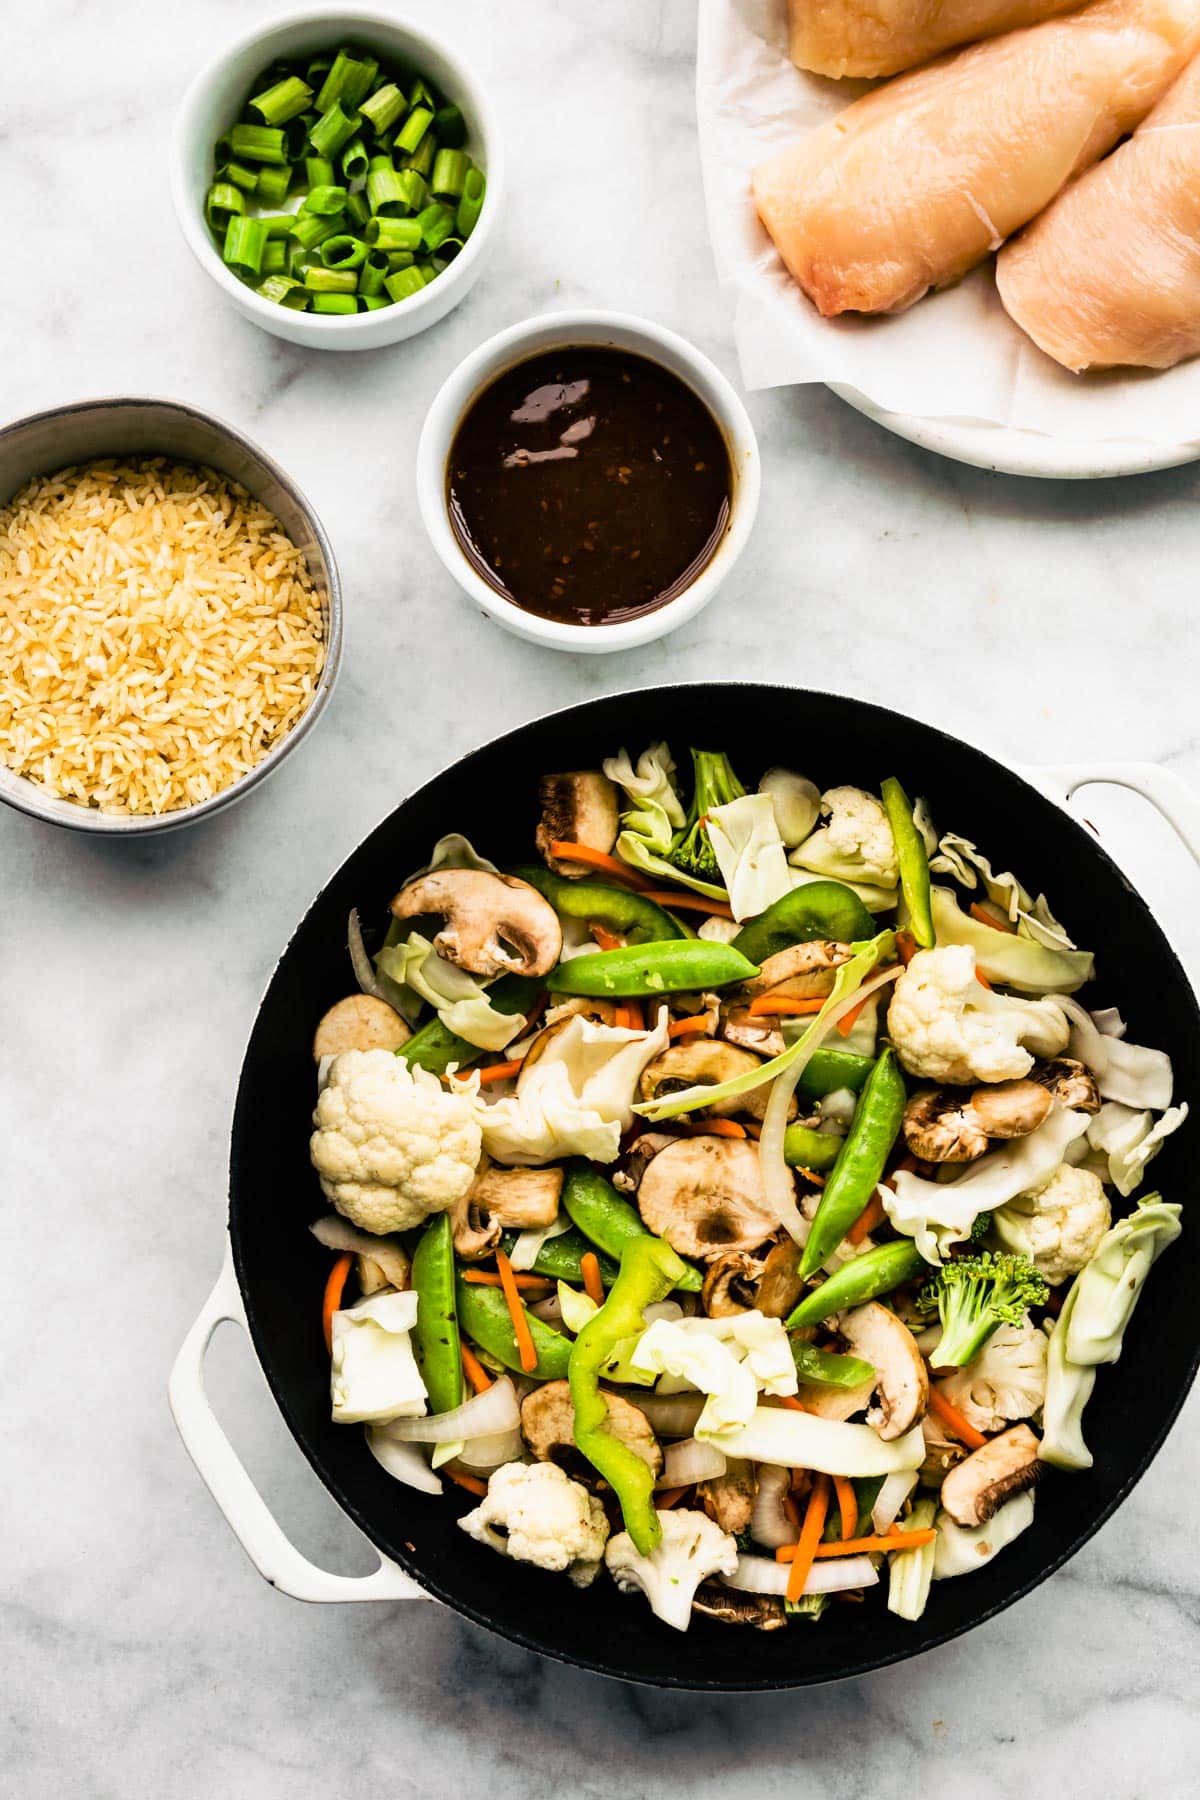 Asian vegetables, rice, chicken breasts and teriyaki sauce in bowls on a marble countertop.